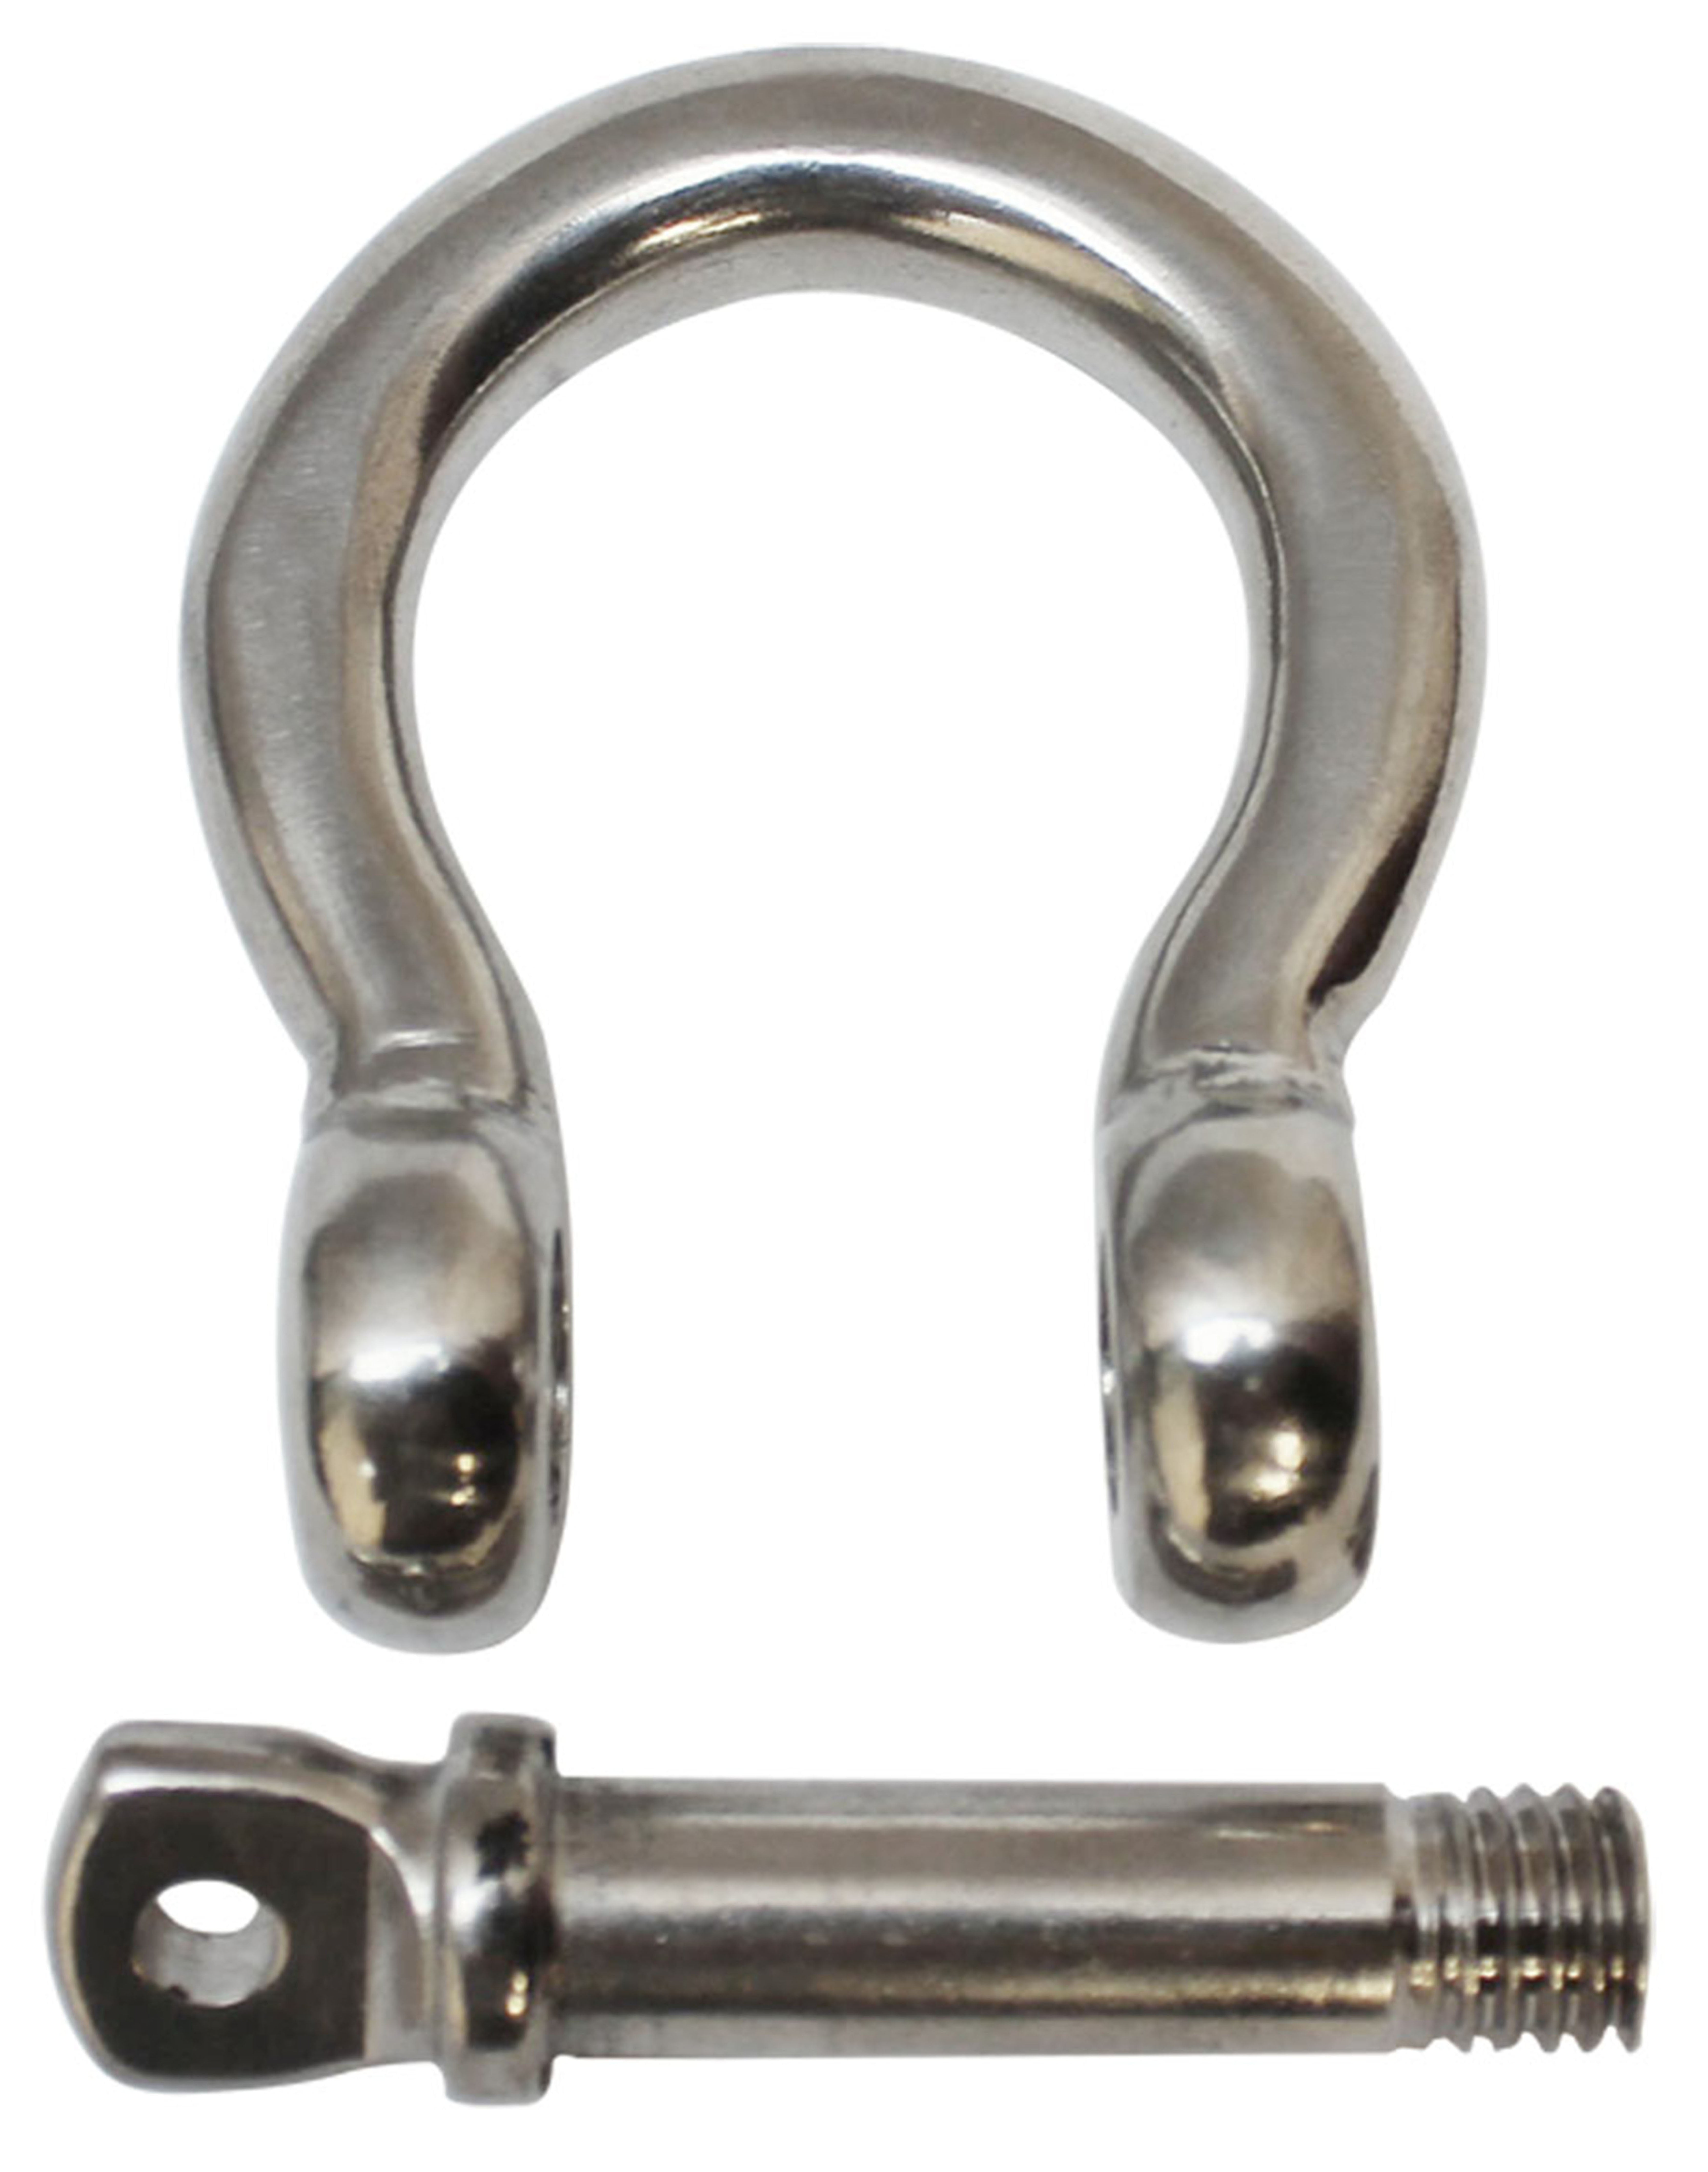 10 Pieces SS316 Marine Rigging Screw Pin Anchor Shackle 5/32 Inch WLL 350 Pounds 